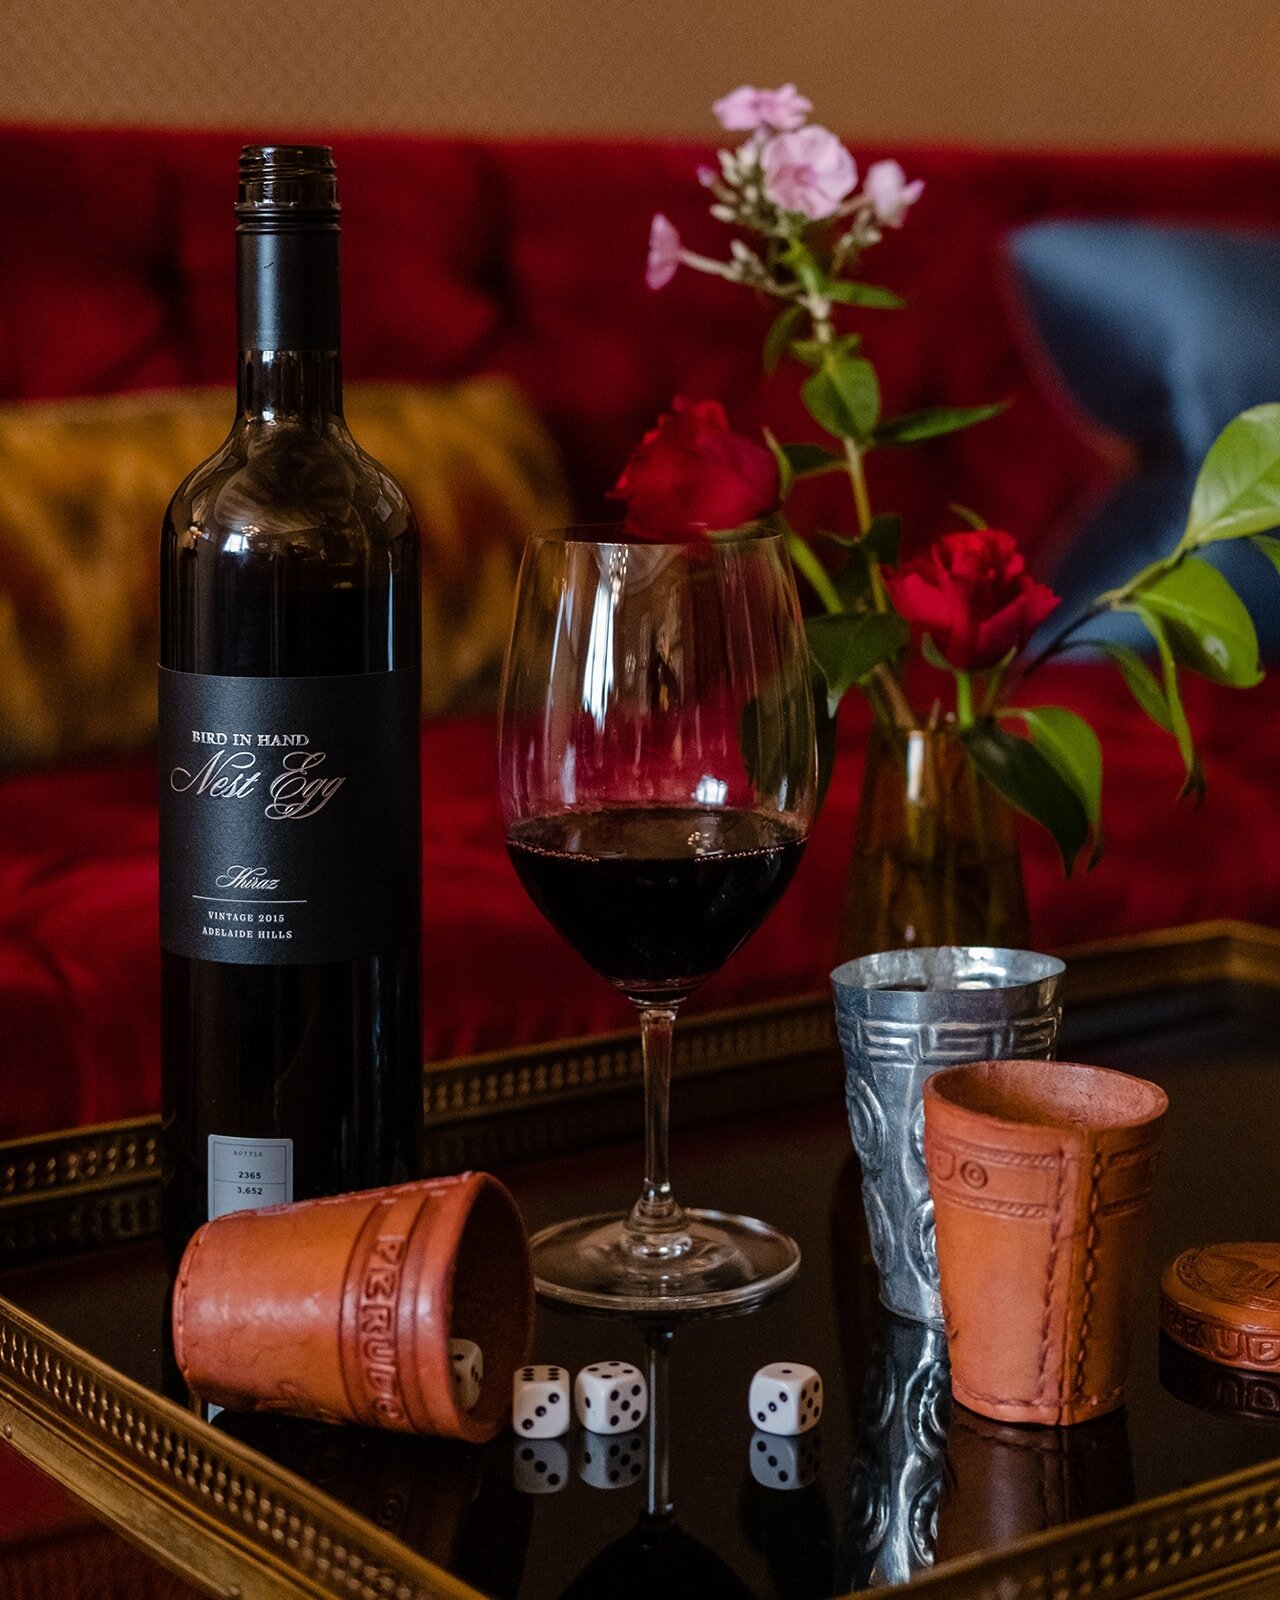 Bird in Hand wine @birdinhandwine partnered with Perudo @perudohq Masterclass hosted by Orson Fry @orsonfry at Mark's Club, Mayfair @marksclubmayfair photographed by Helen and produced by @kendalandpartners⁠
.⁠
.⁠
.⁠
⁠
#partyphotography #eventphotogr